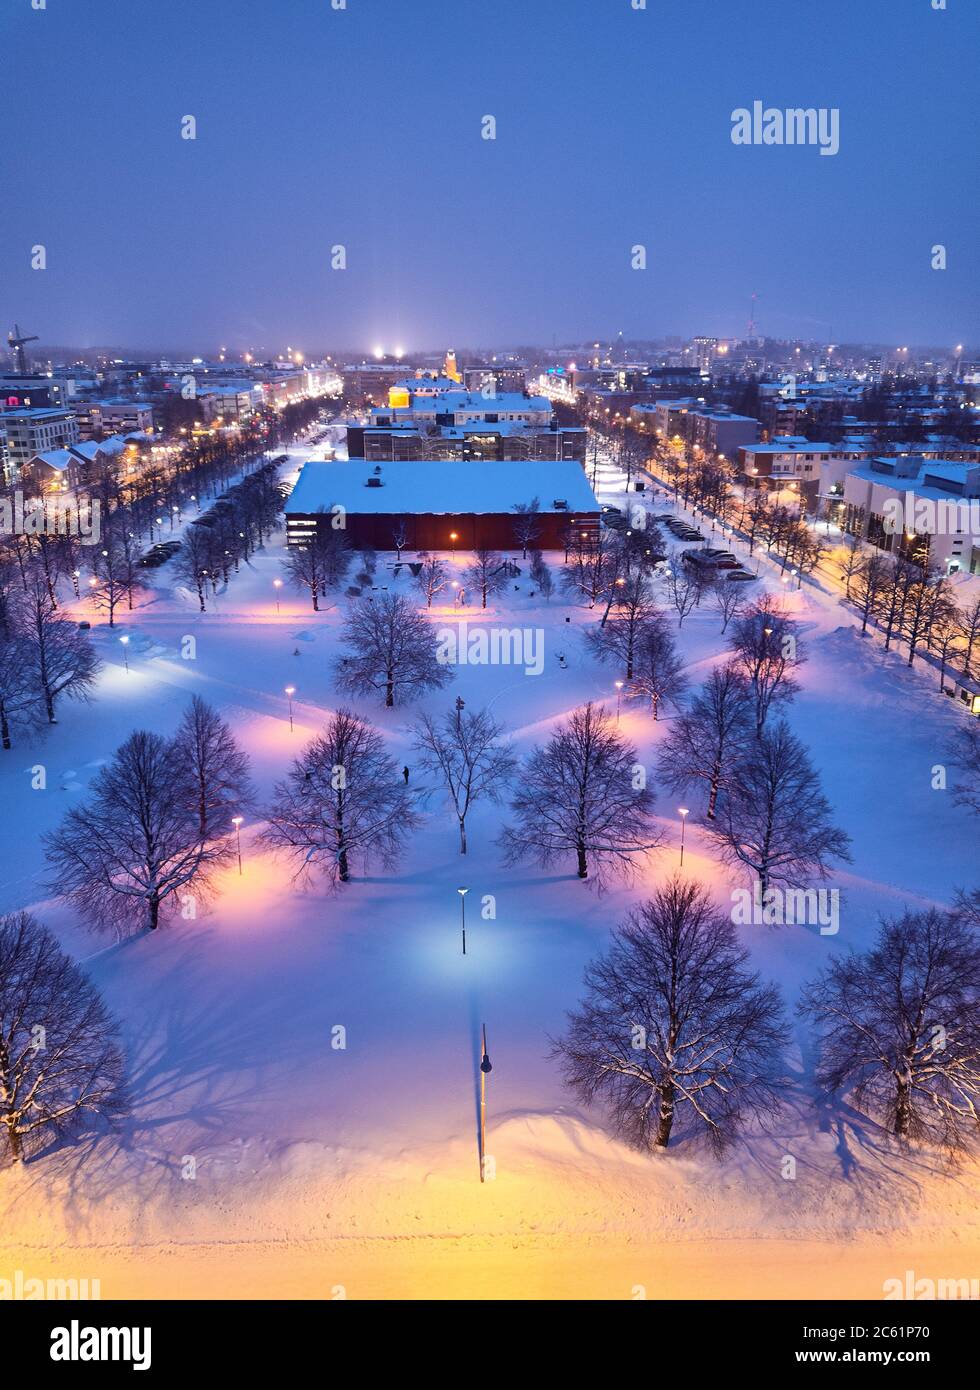 Aerial view of Joensuu, city in the evening, winter cityscape, Finland. Stock Photo